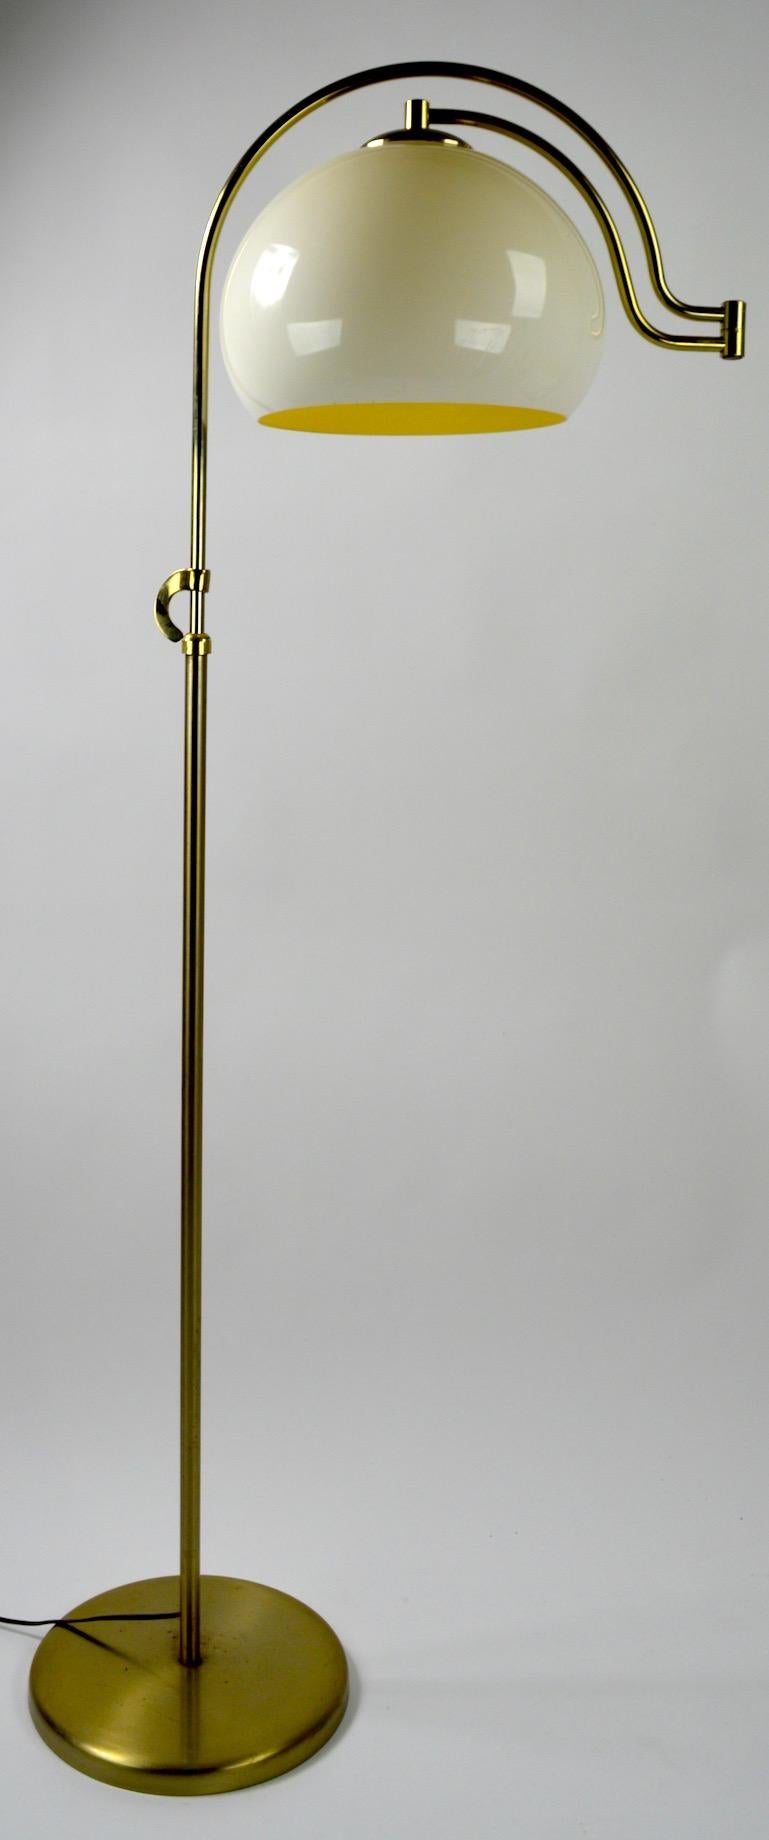 Interesting adjustable floor lamp by the Laurel Lamp Manufacturing Company. This lamp is adjustable in height (Low position 52 inch H x 69 H in High position ) in addition, the arm swings and is jointed to move the plastic shade exactly where you